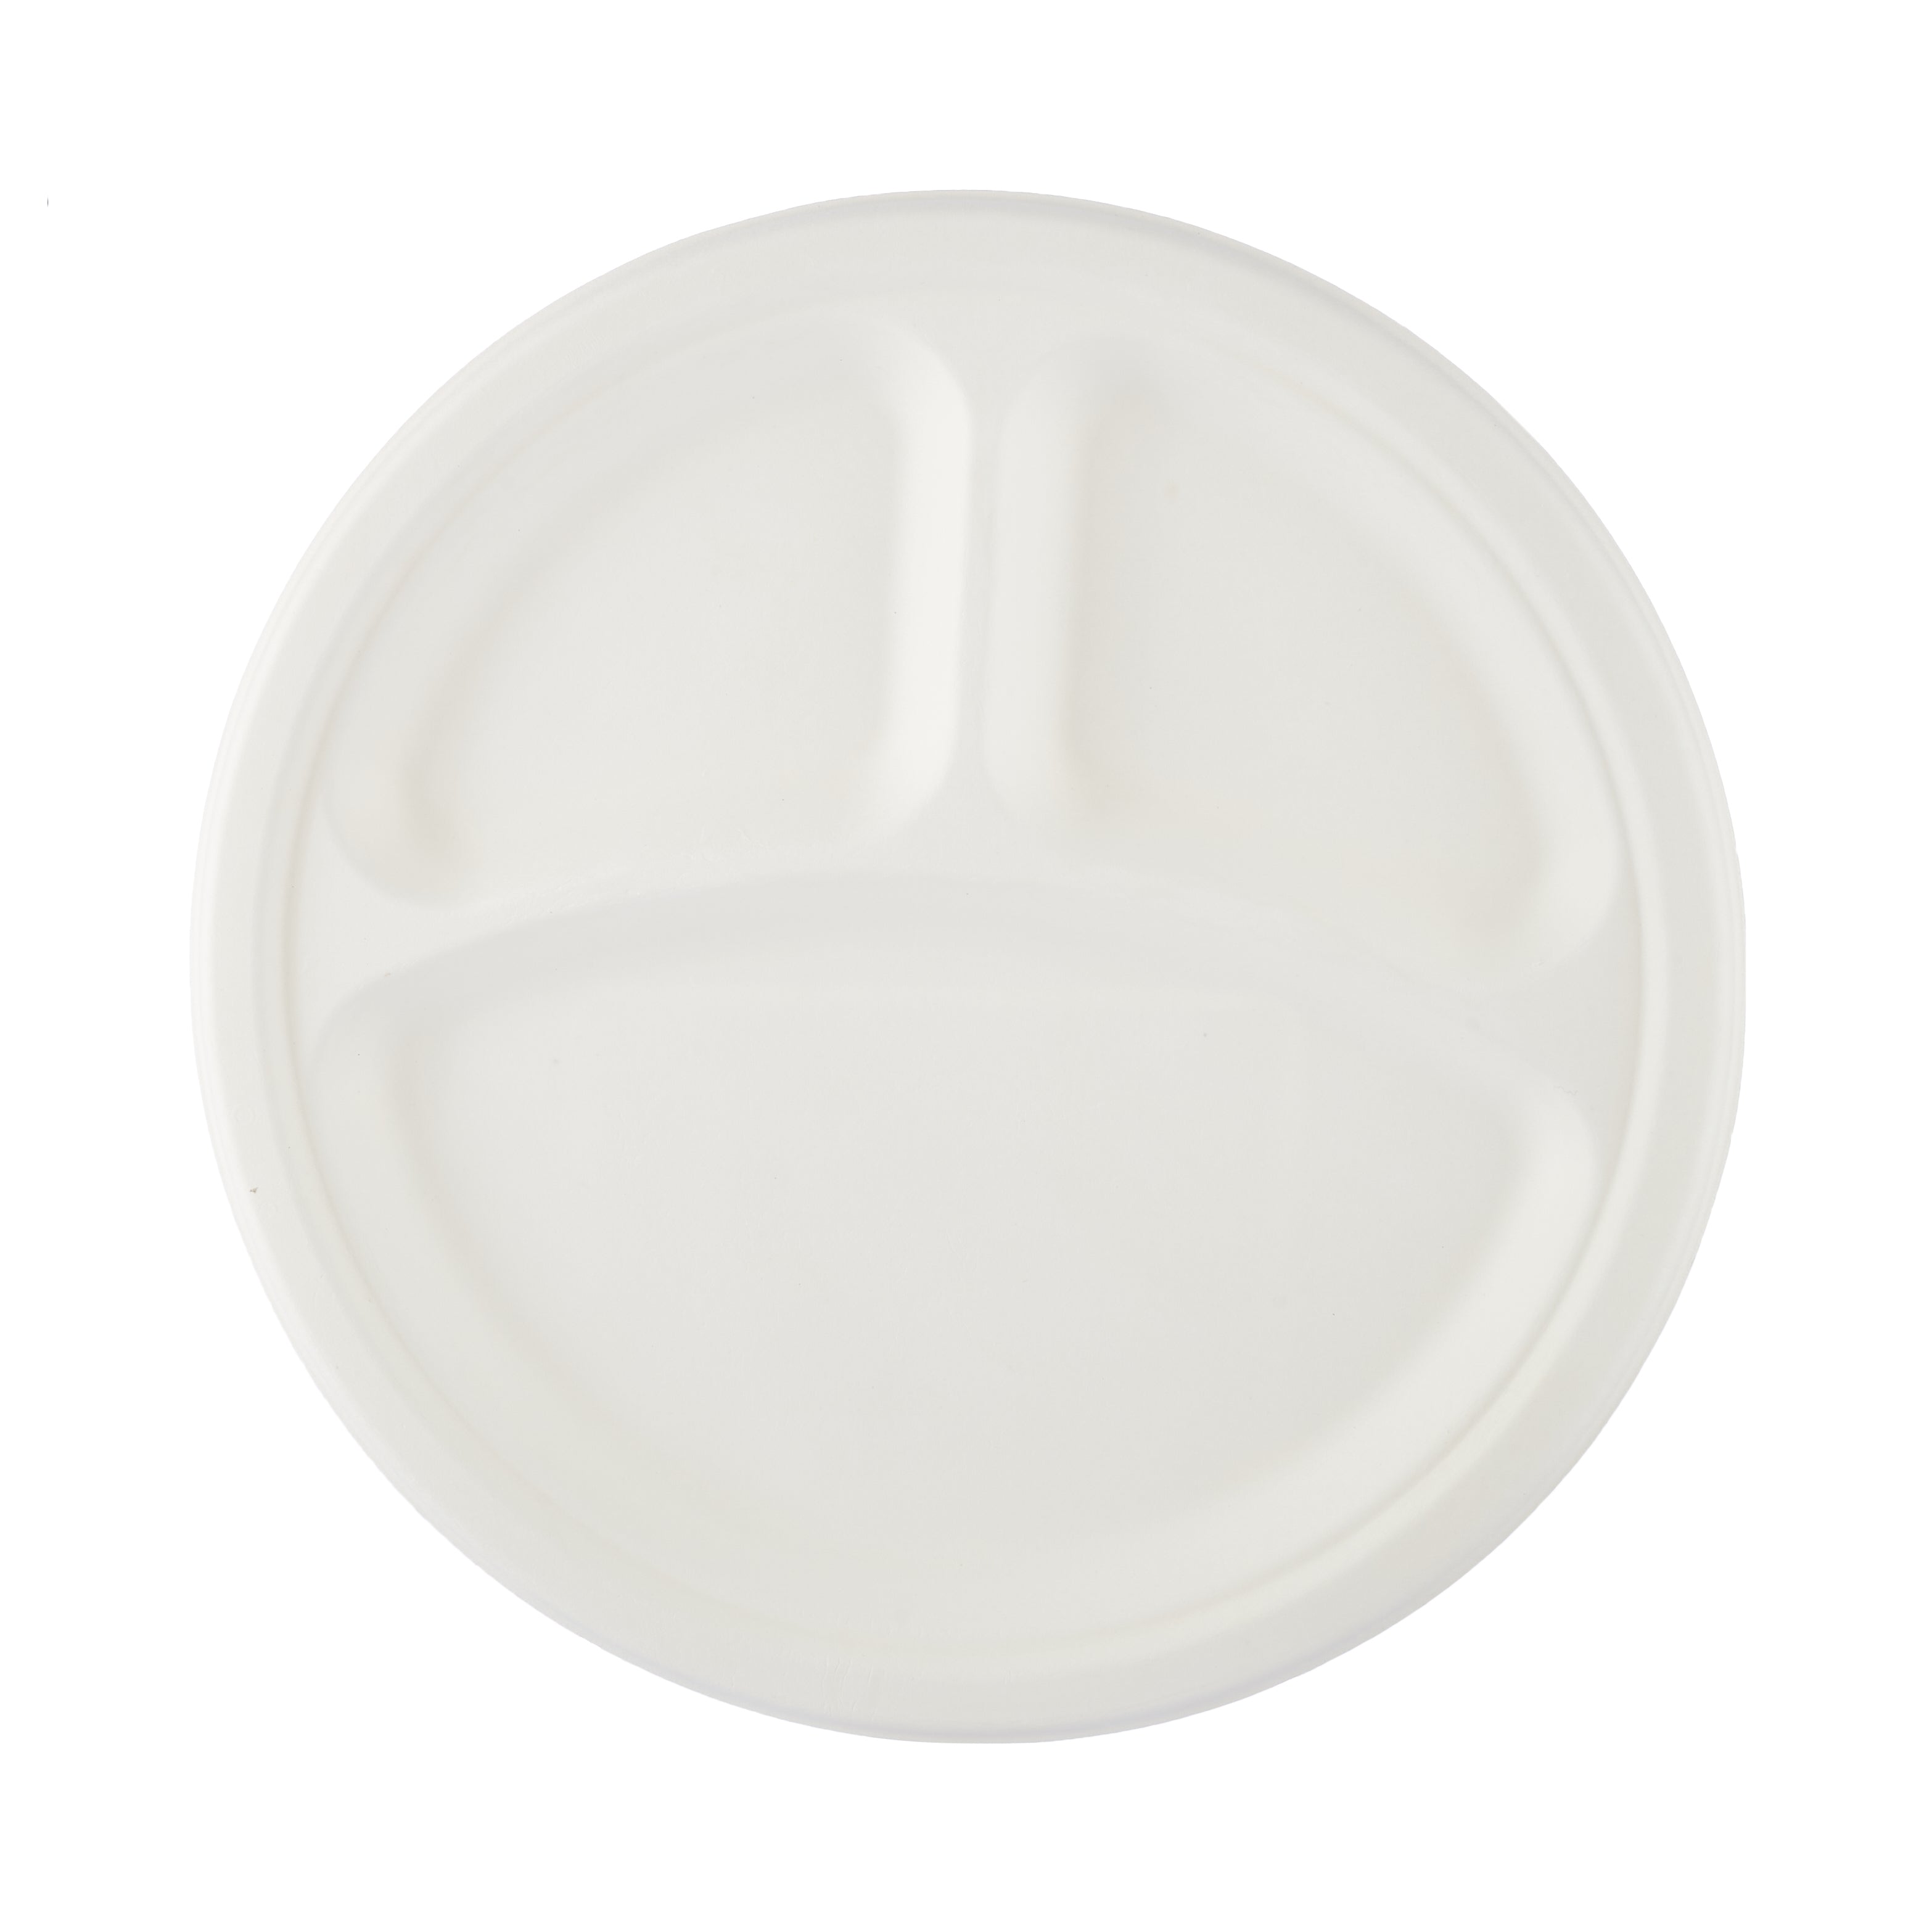 Hotpack Biodegradable Paperplate10' 3 Compartmat 10 Pieces